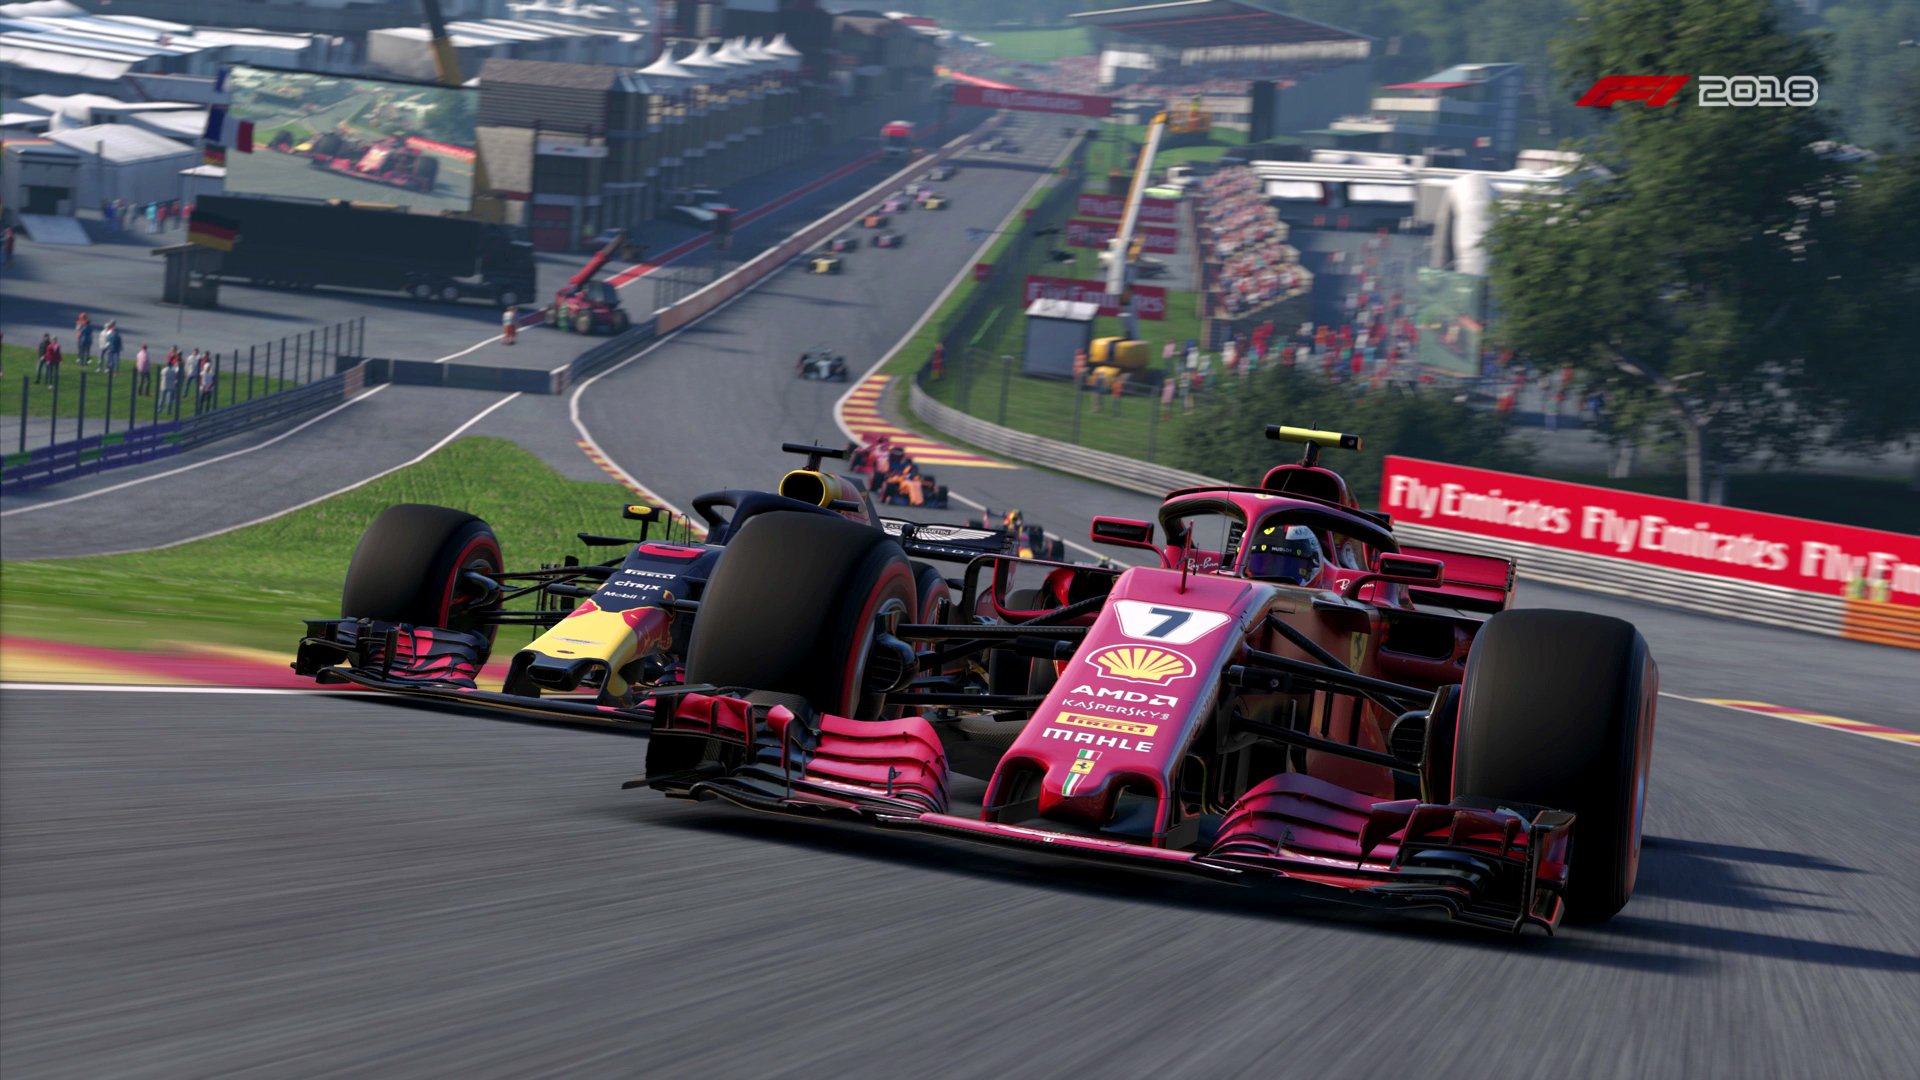 cover Ready Civilian F1 2018 Xbox One X Review – GTPlanet